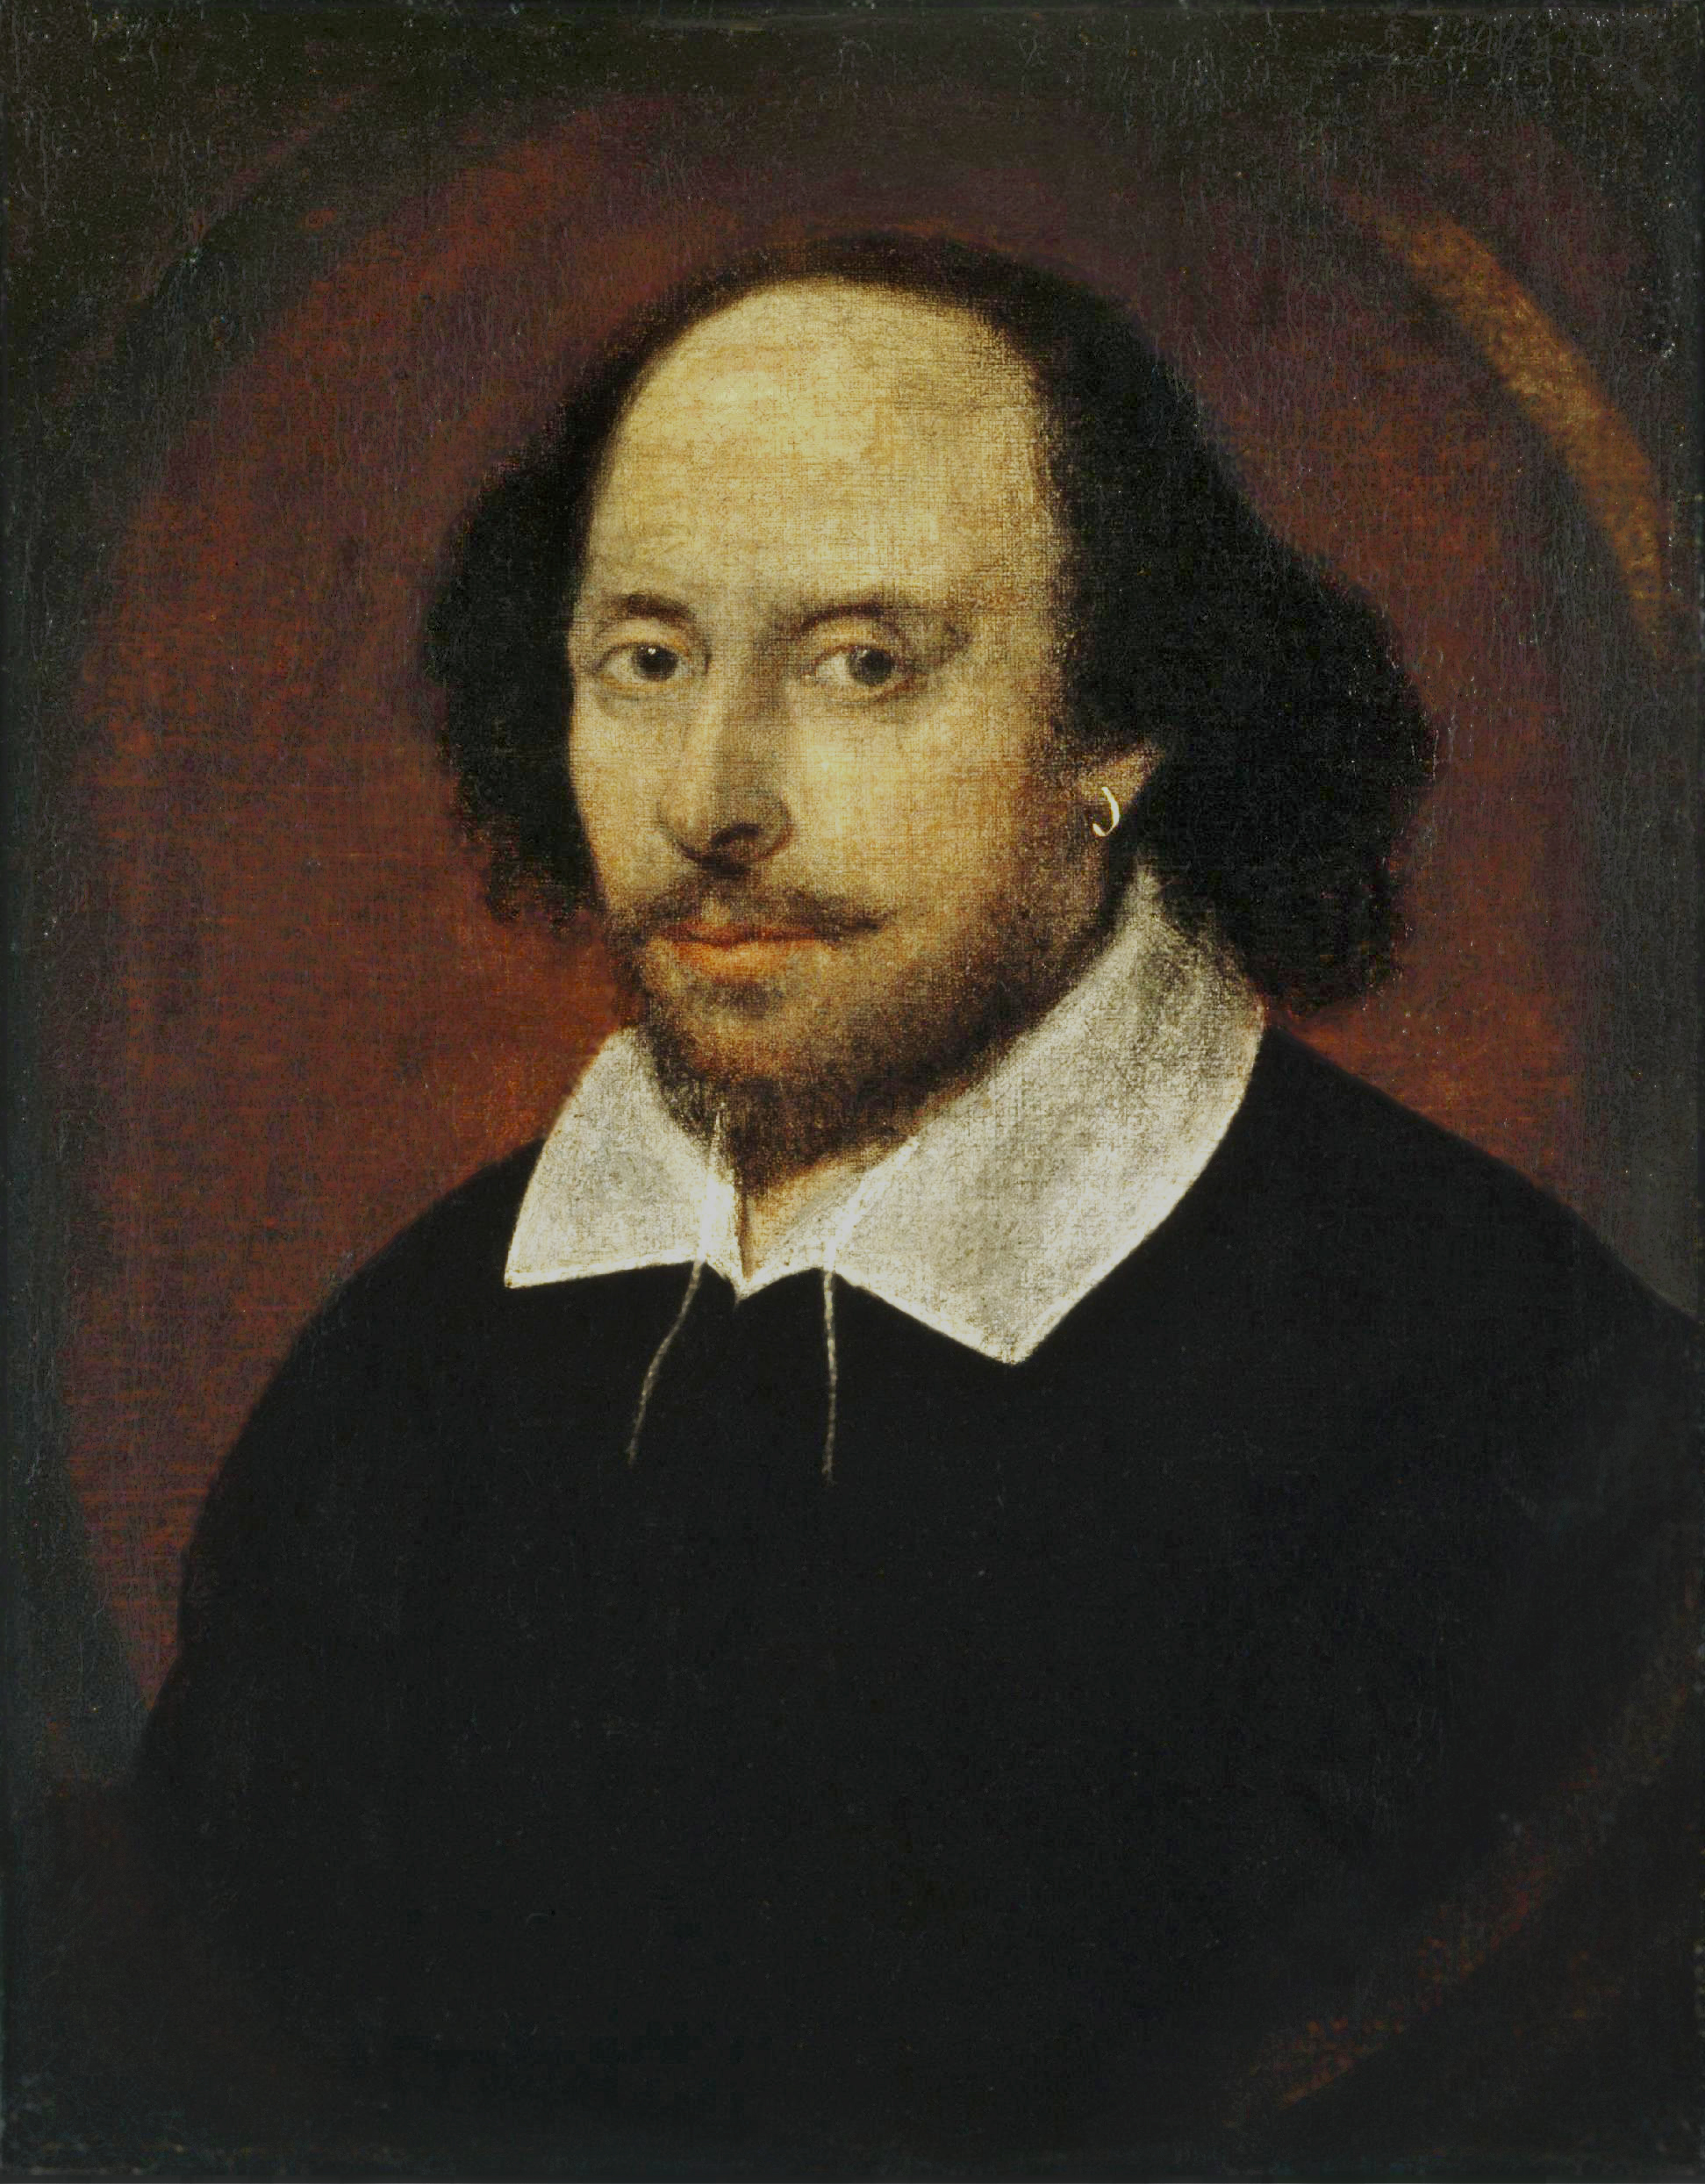 The Chandos Portrait of William Shakespeare, attributed to John Taylor